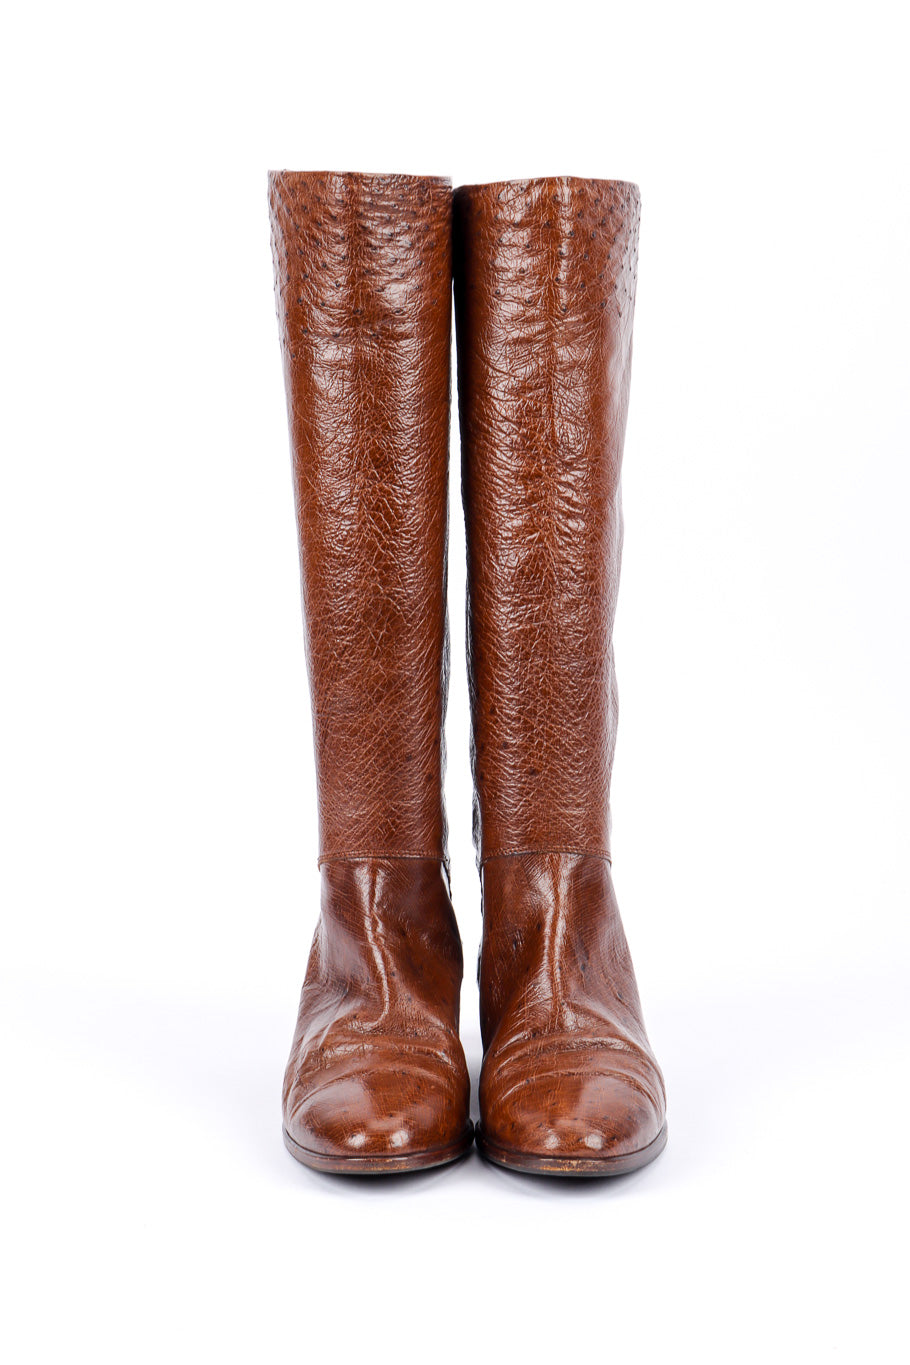 Vintage Gucci Brown Ostrich Leather Riding Boot front view @recessla